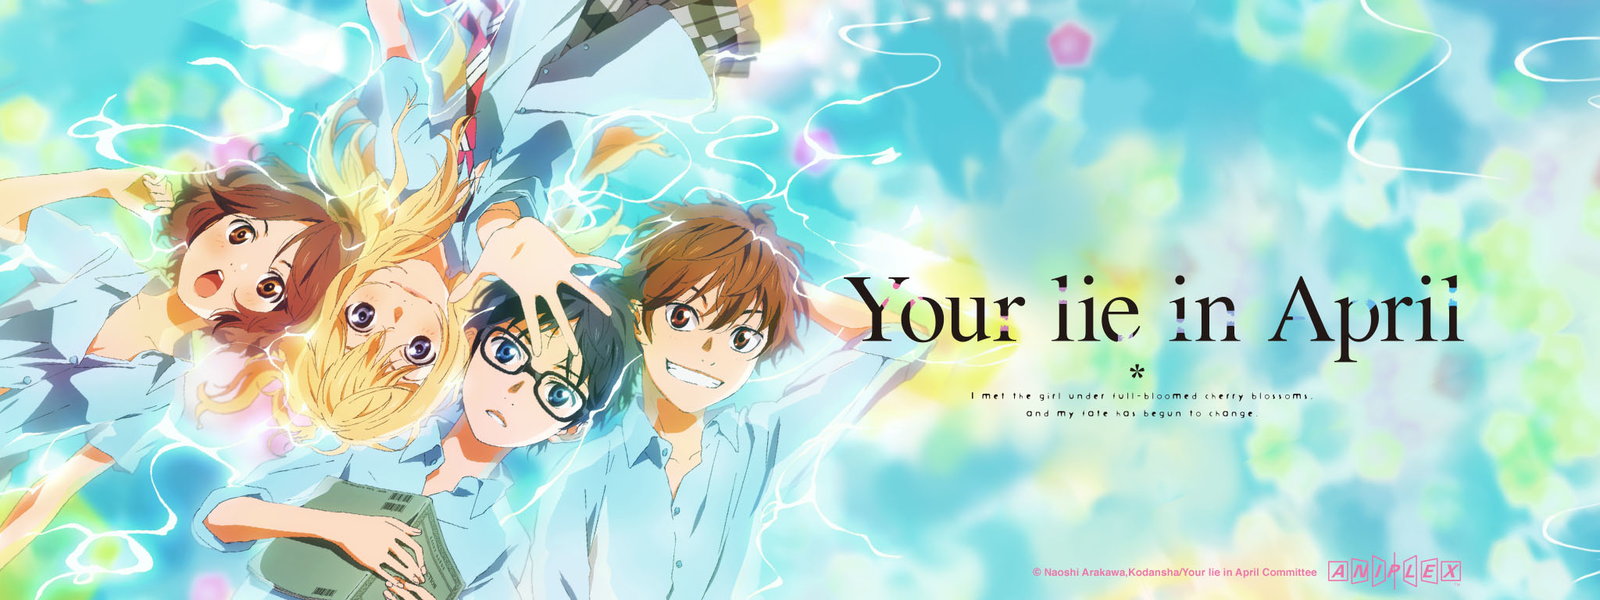 watch your lie in april